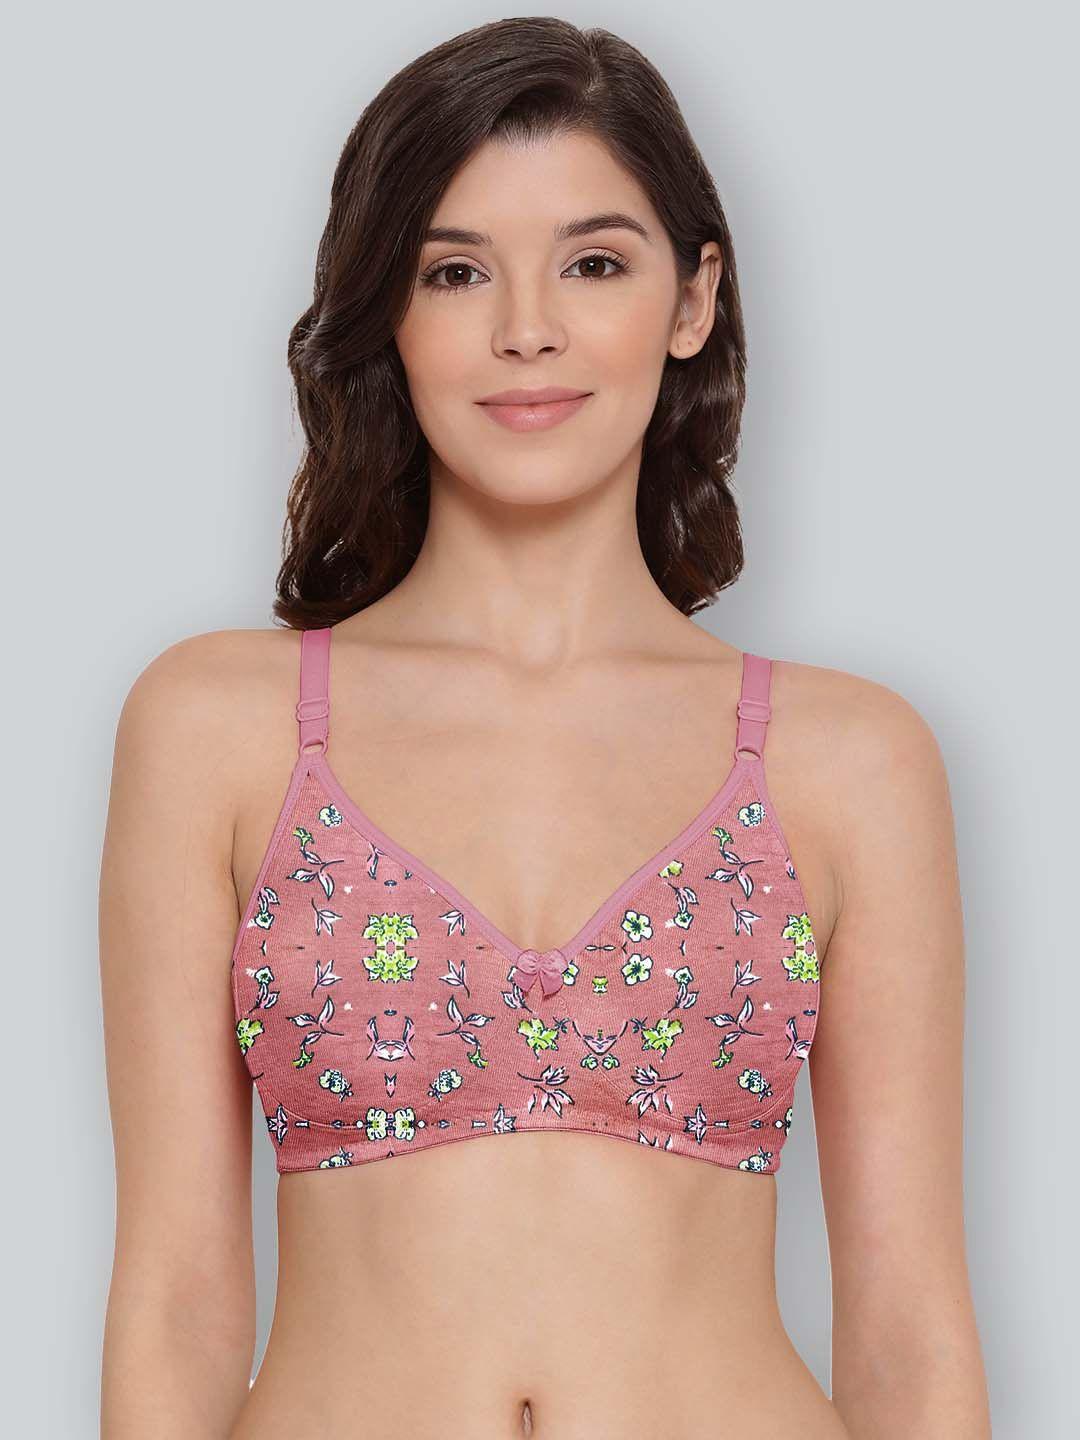 lyra-floral-printed-soft-detachable-straps-cotton-t-shirt-bra-with-all-day-comfort